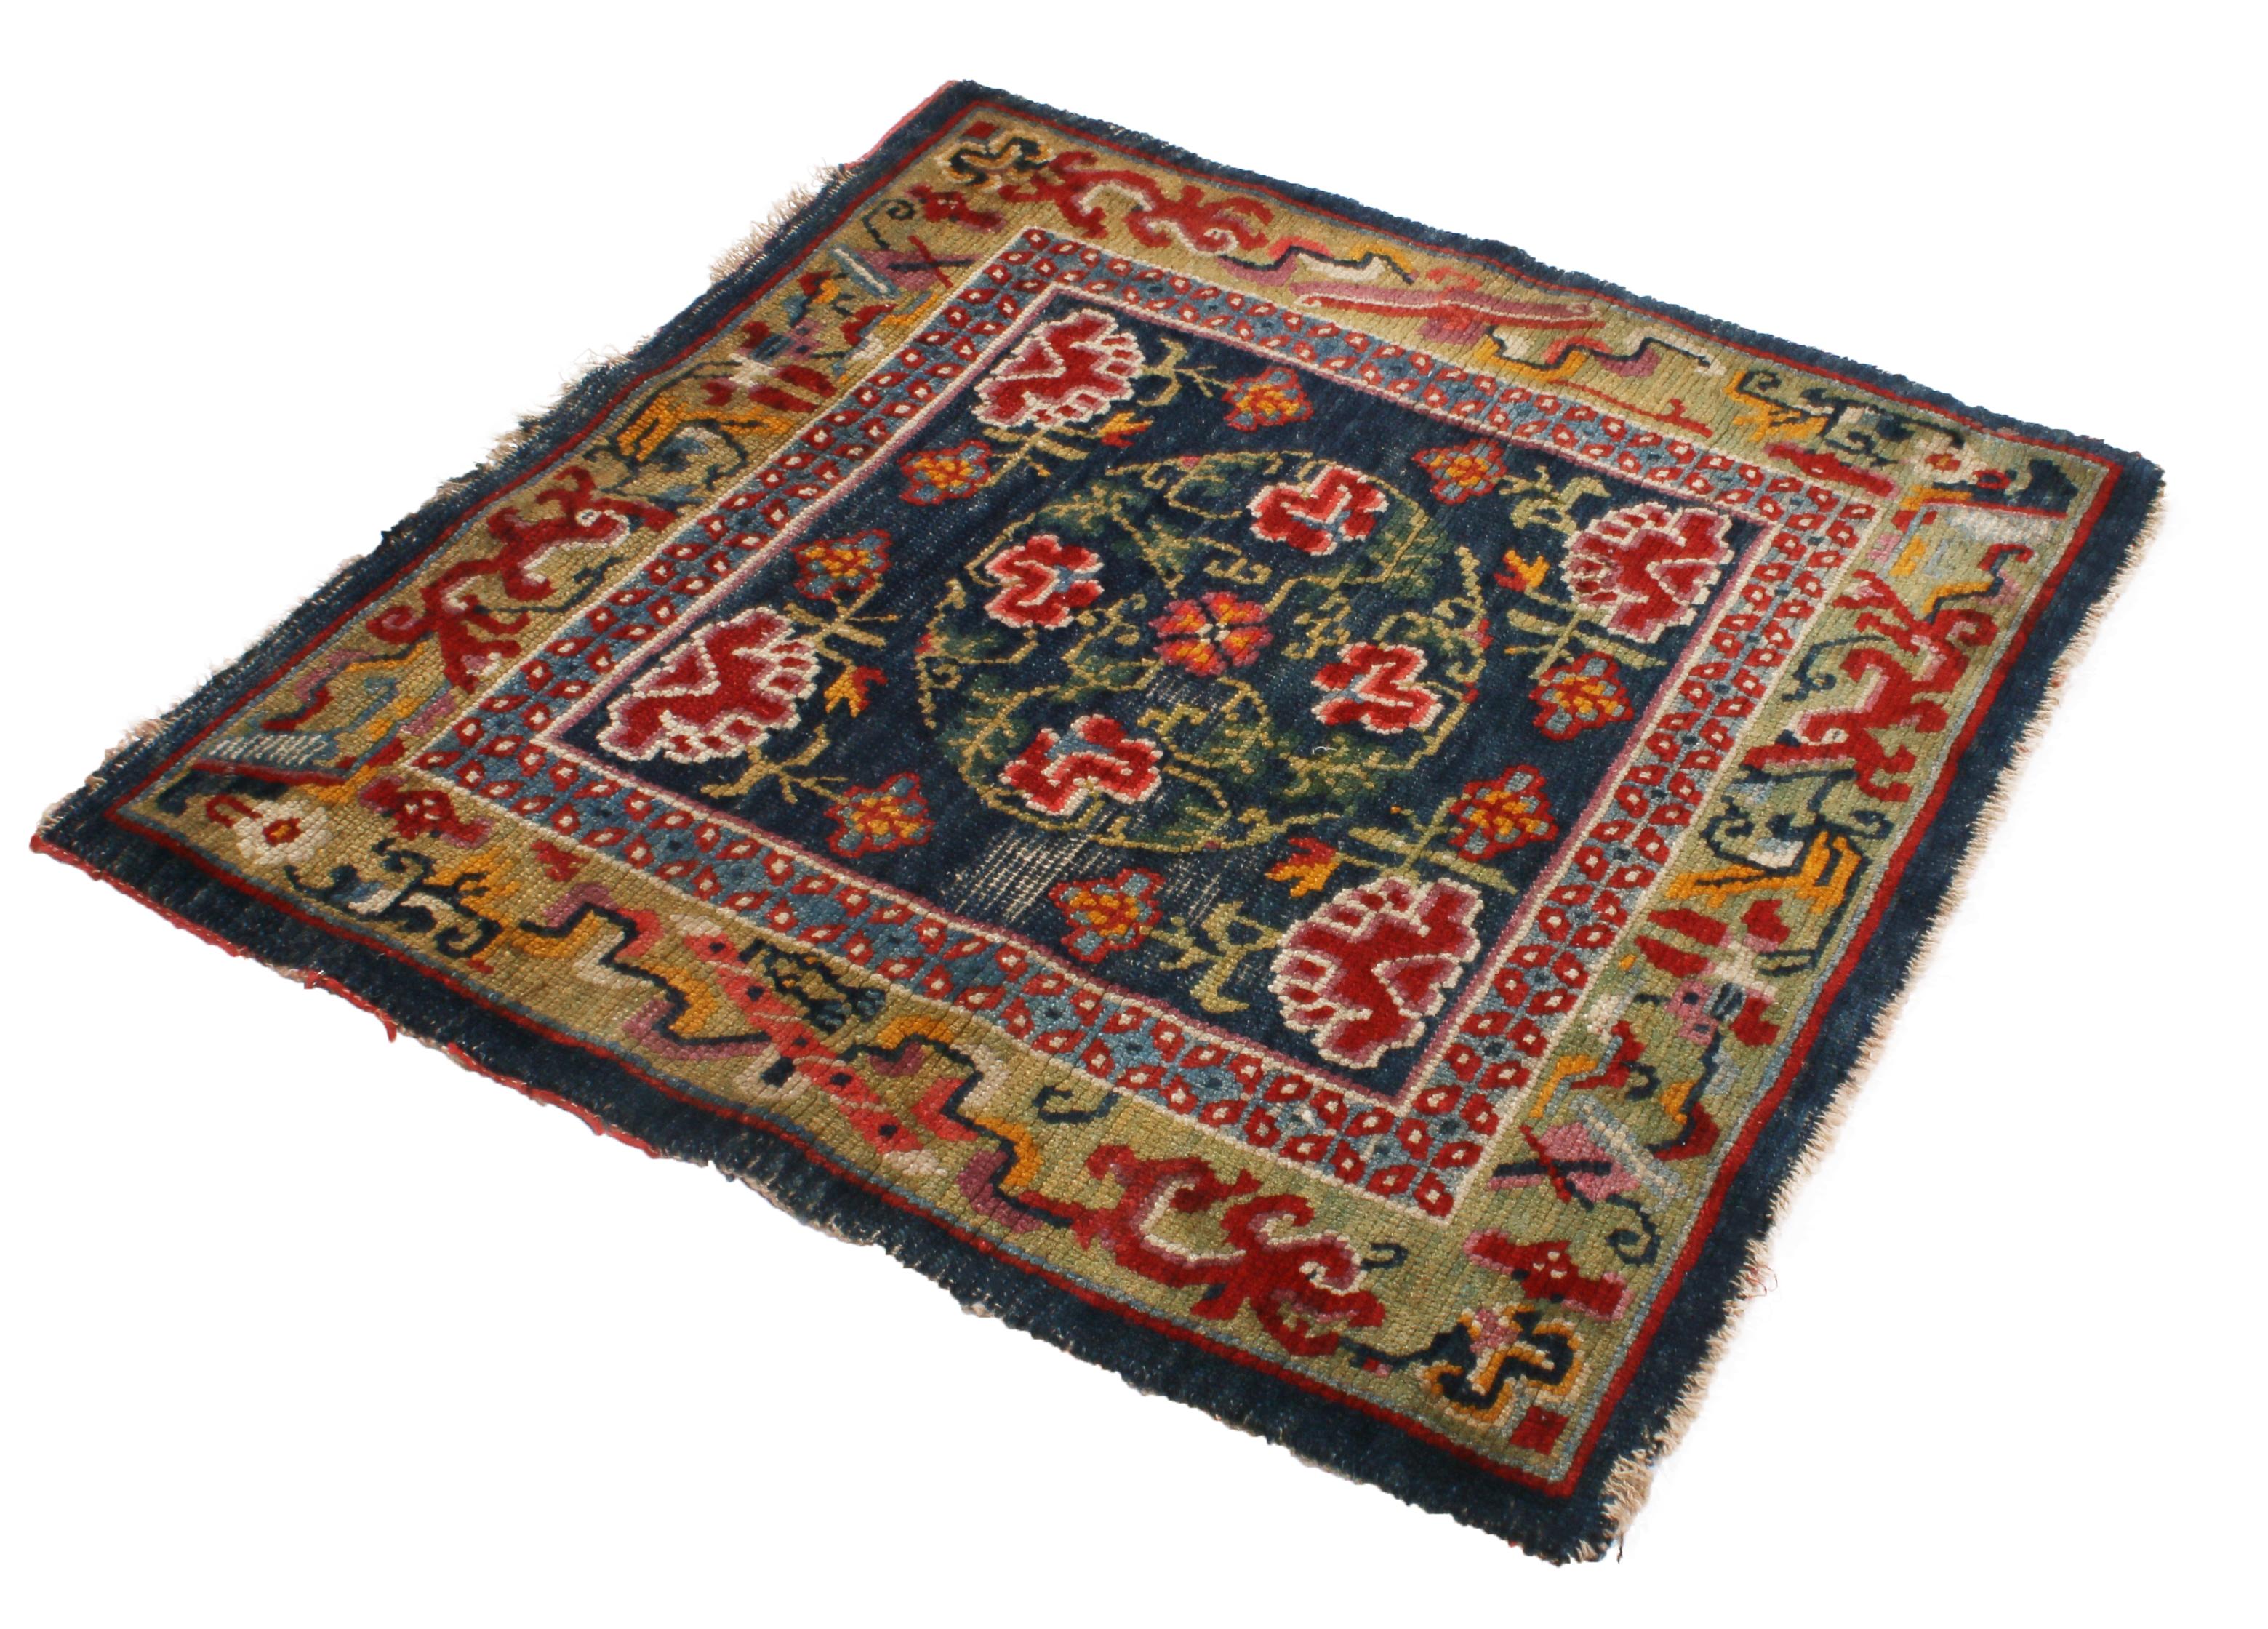 Hand-Knotted Antique Tibetan Geometric Green and Red Wool Floral Rug